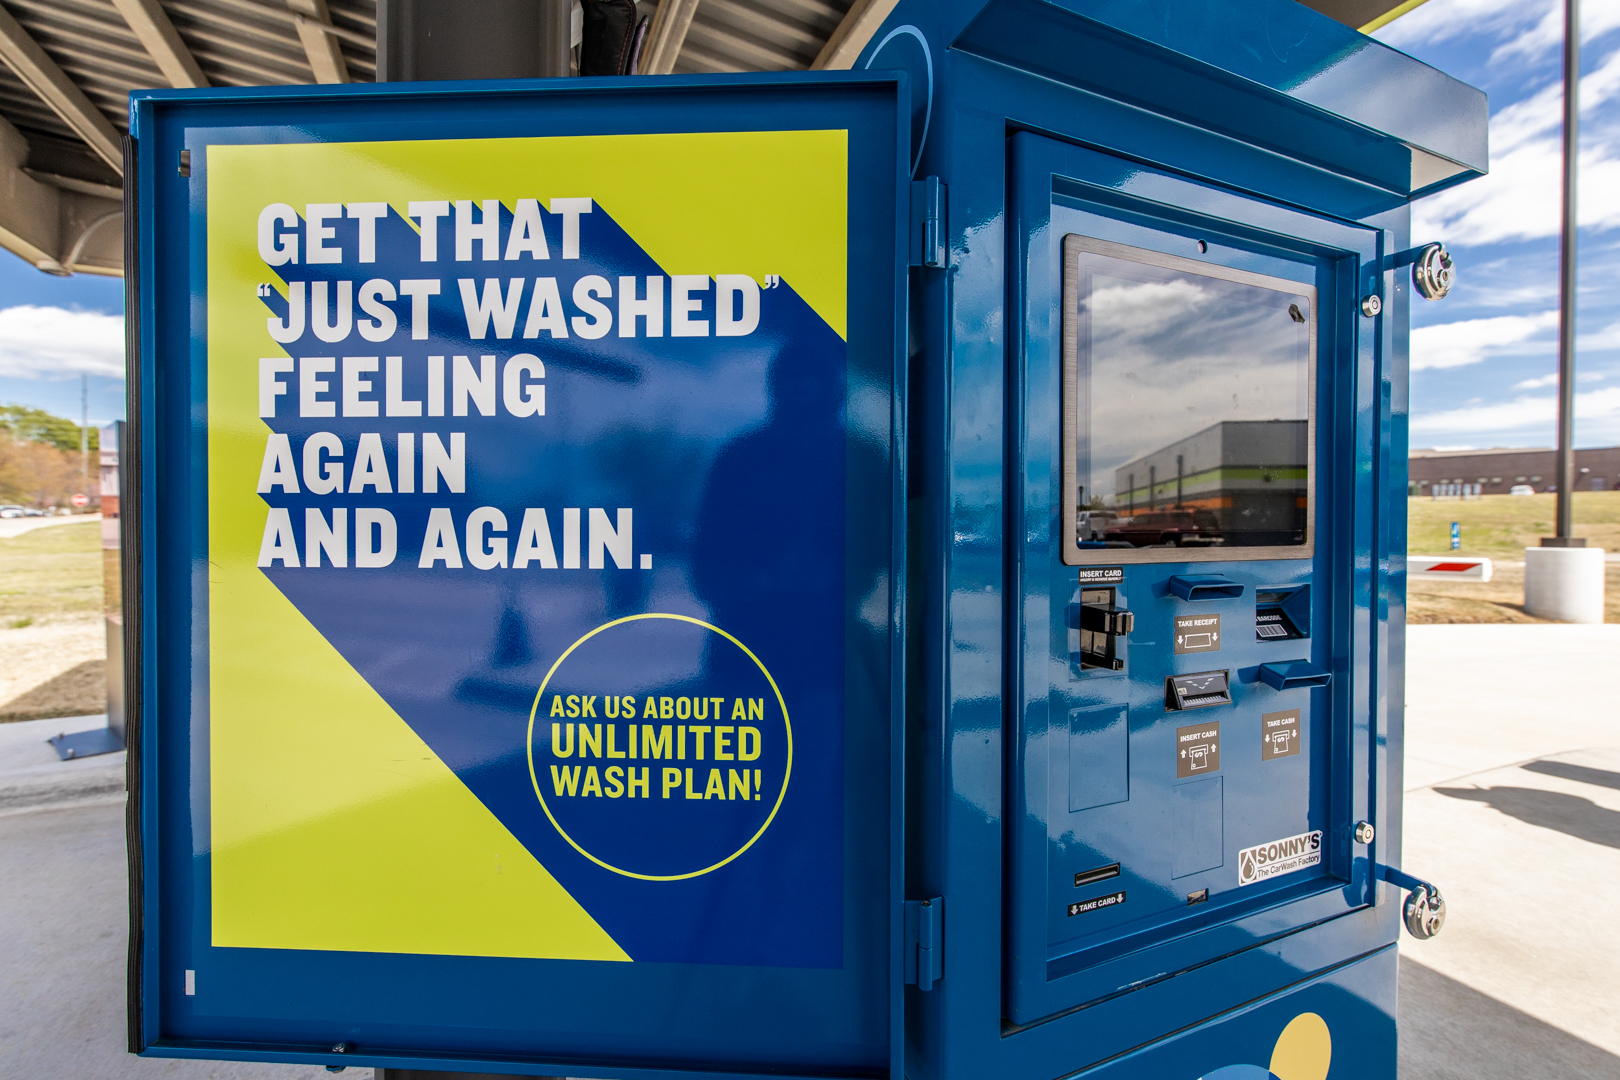 Blue Splash Car Wash payment kiosk with sign saying "GET THAT 'JUST WASHED' FEELING AGAIN AND AGAIN. ASK US ABOUT AN UNLIMITED WASH PLAN!"